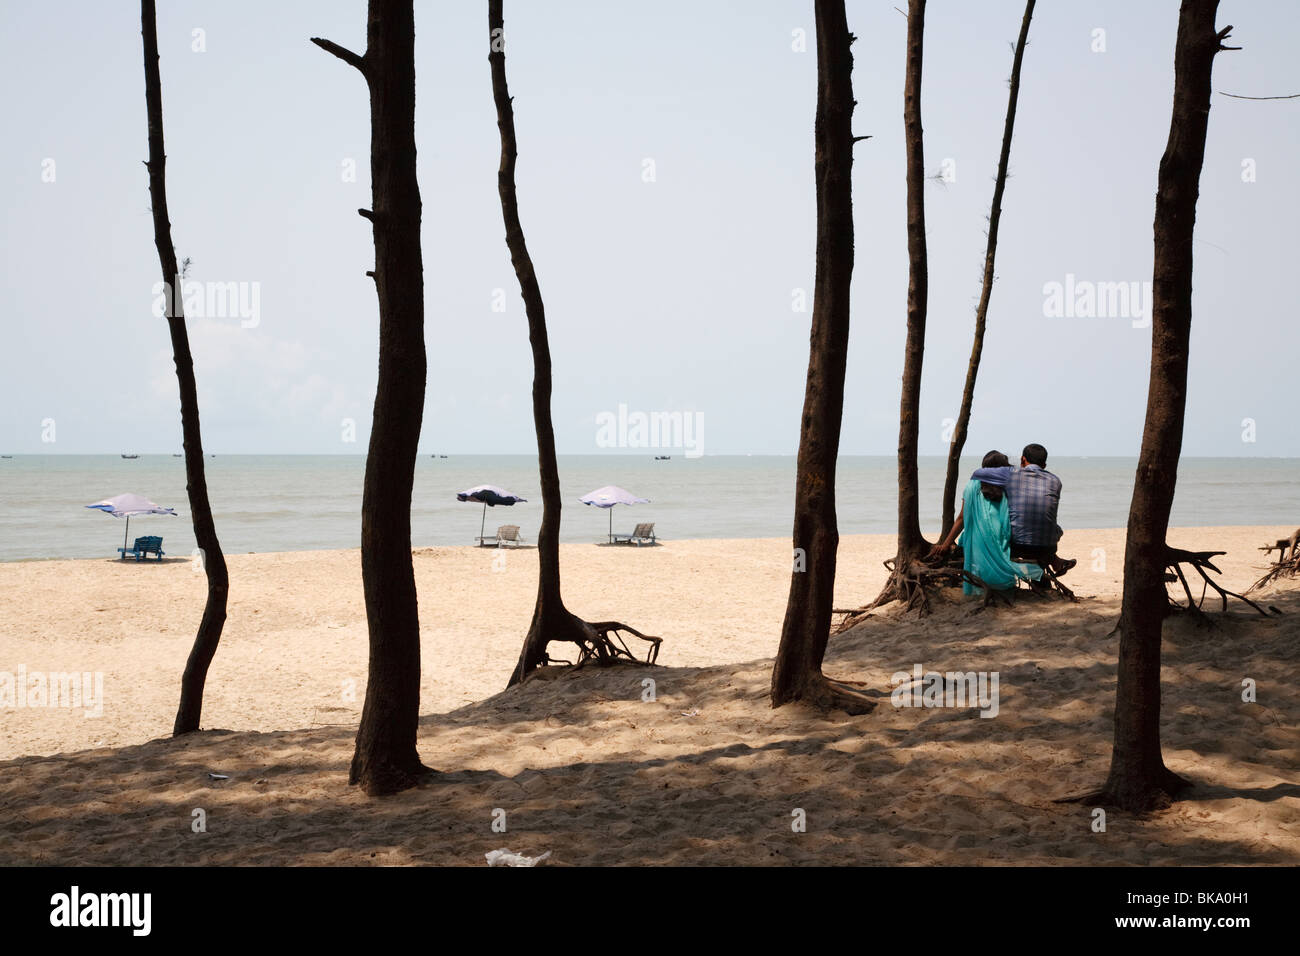 A couple on the beach on the shore of Bay of Bengal in Cox's Bazar, Bangladesh Stock Photo